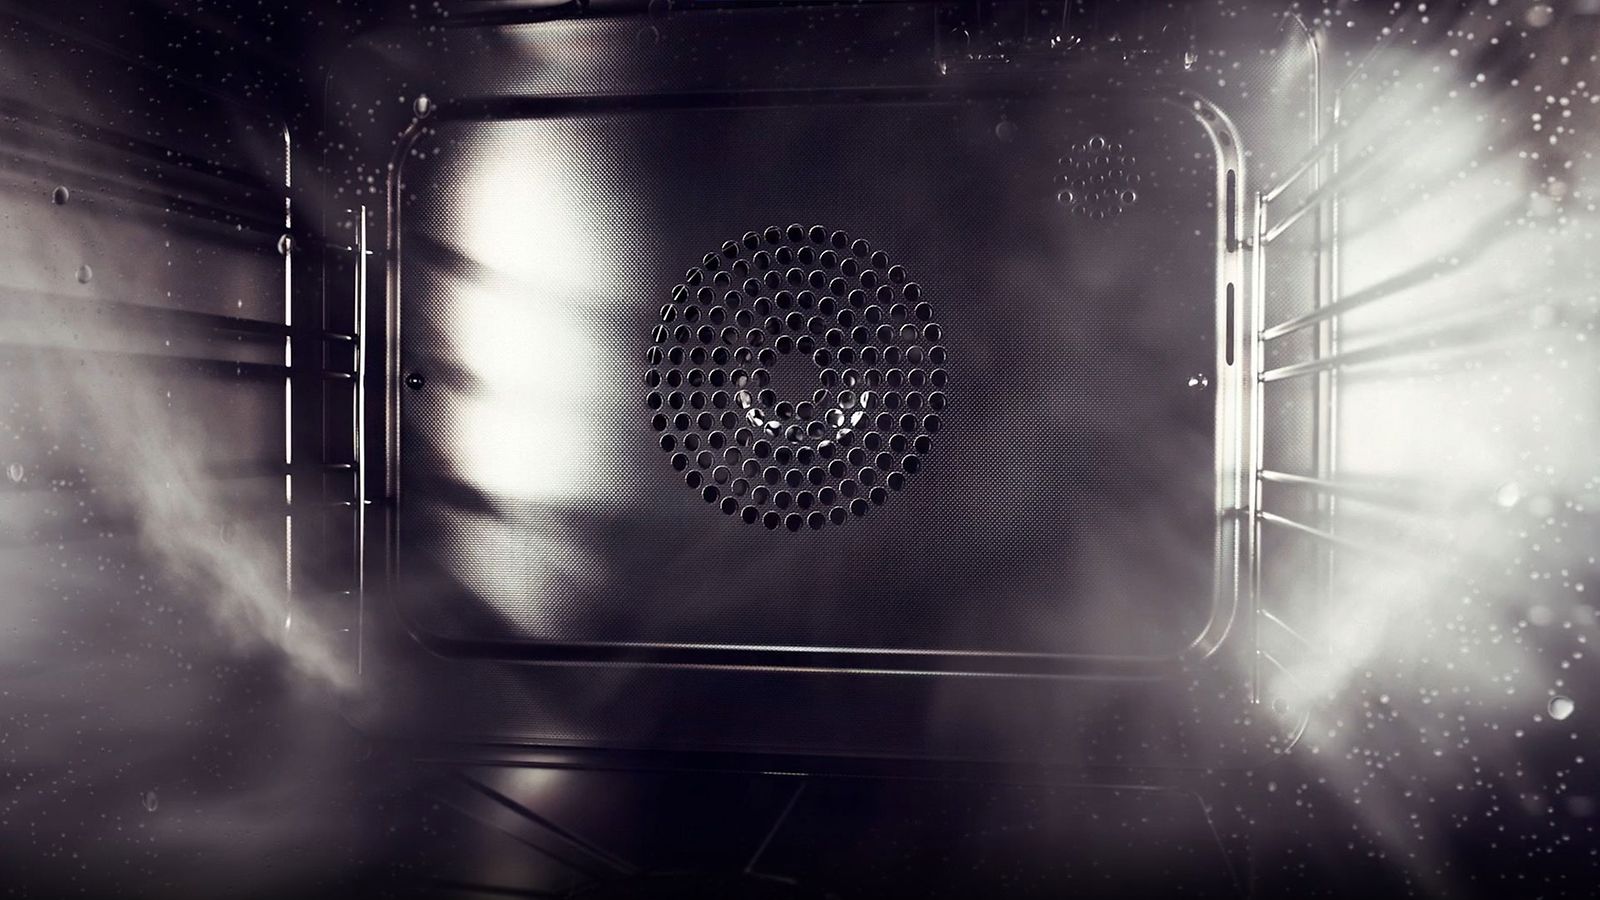 Screenshot of Miele's combined steam oven from it's inside and cloud of steam